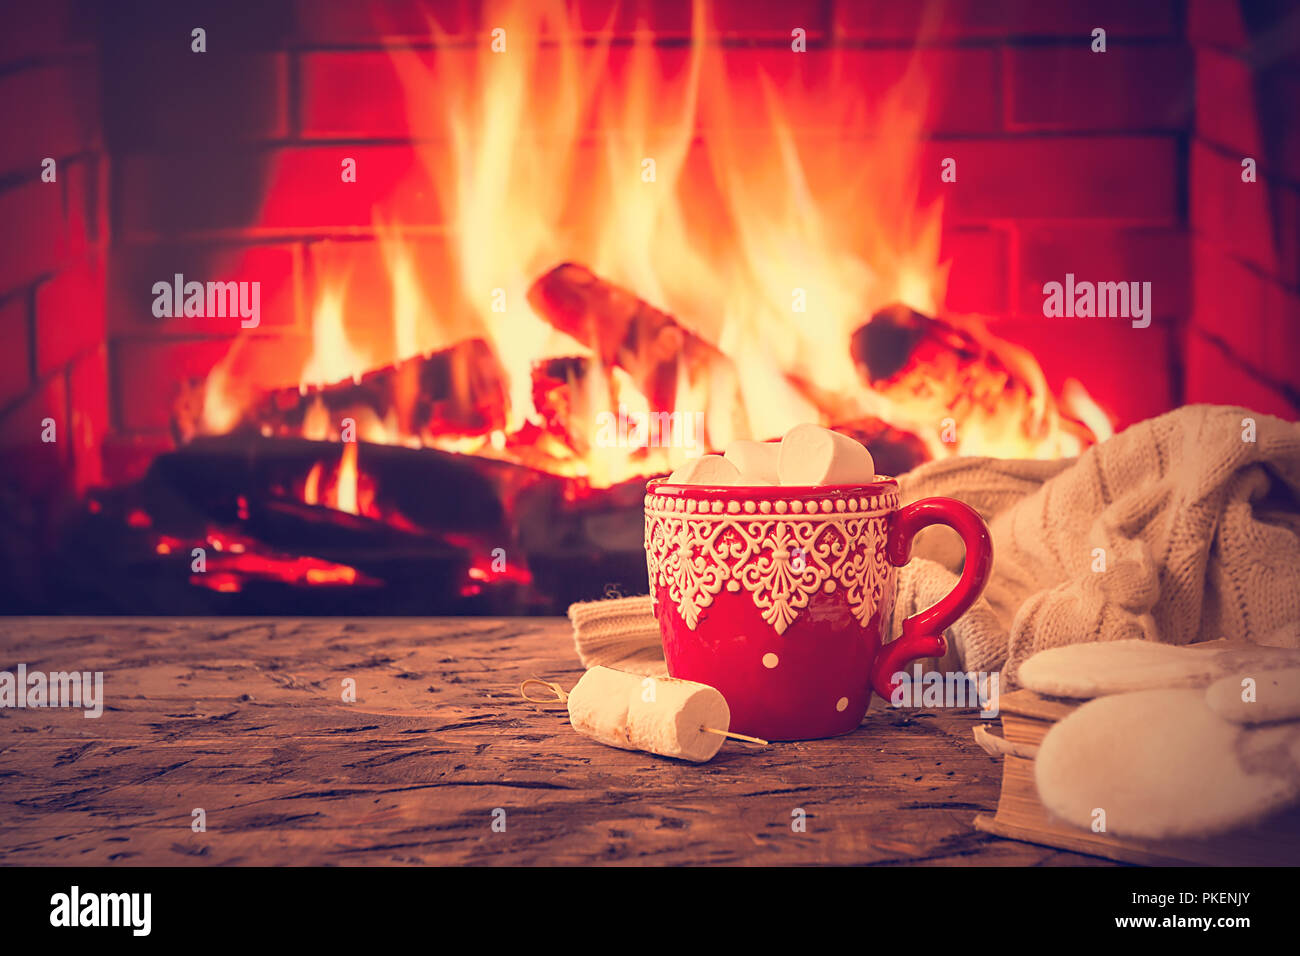 https://c8.alamy.com/comp/PKENJY/mug-of-hot-chocolate-or-coffee-with-marshmallows-in-a-red-mug-on-vintage-wood-table-in-front-of-fireplace-as-a-background-christmas-or-winter-warming-PKENJY.jpg